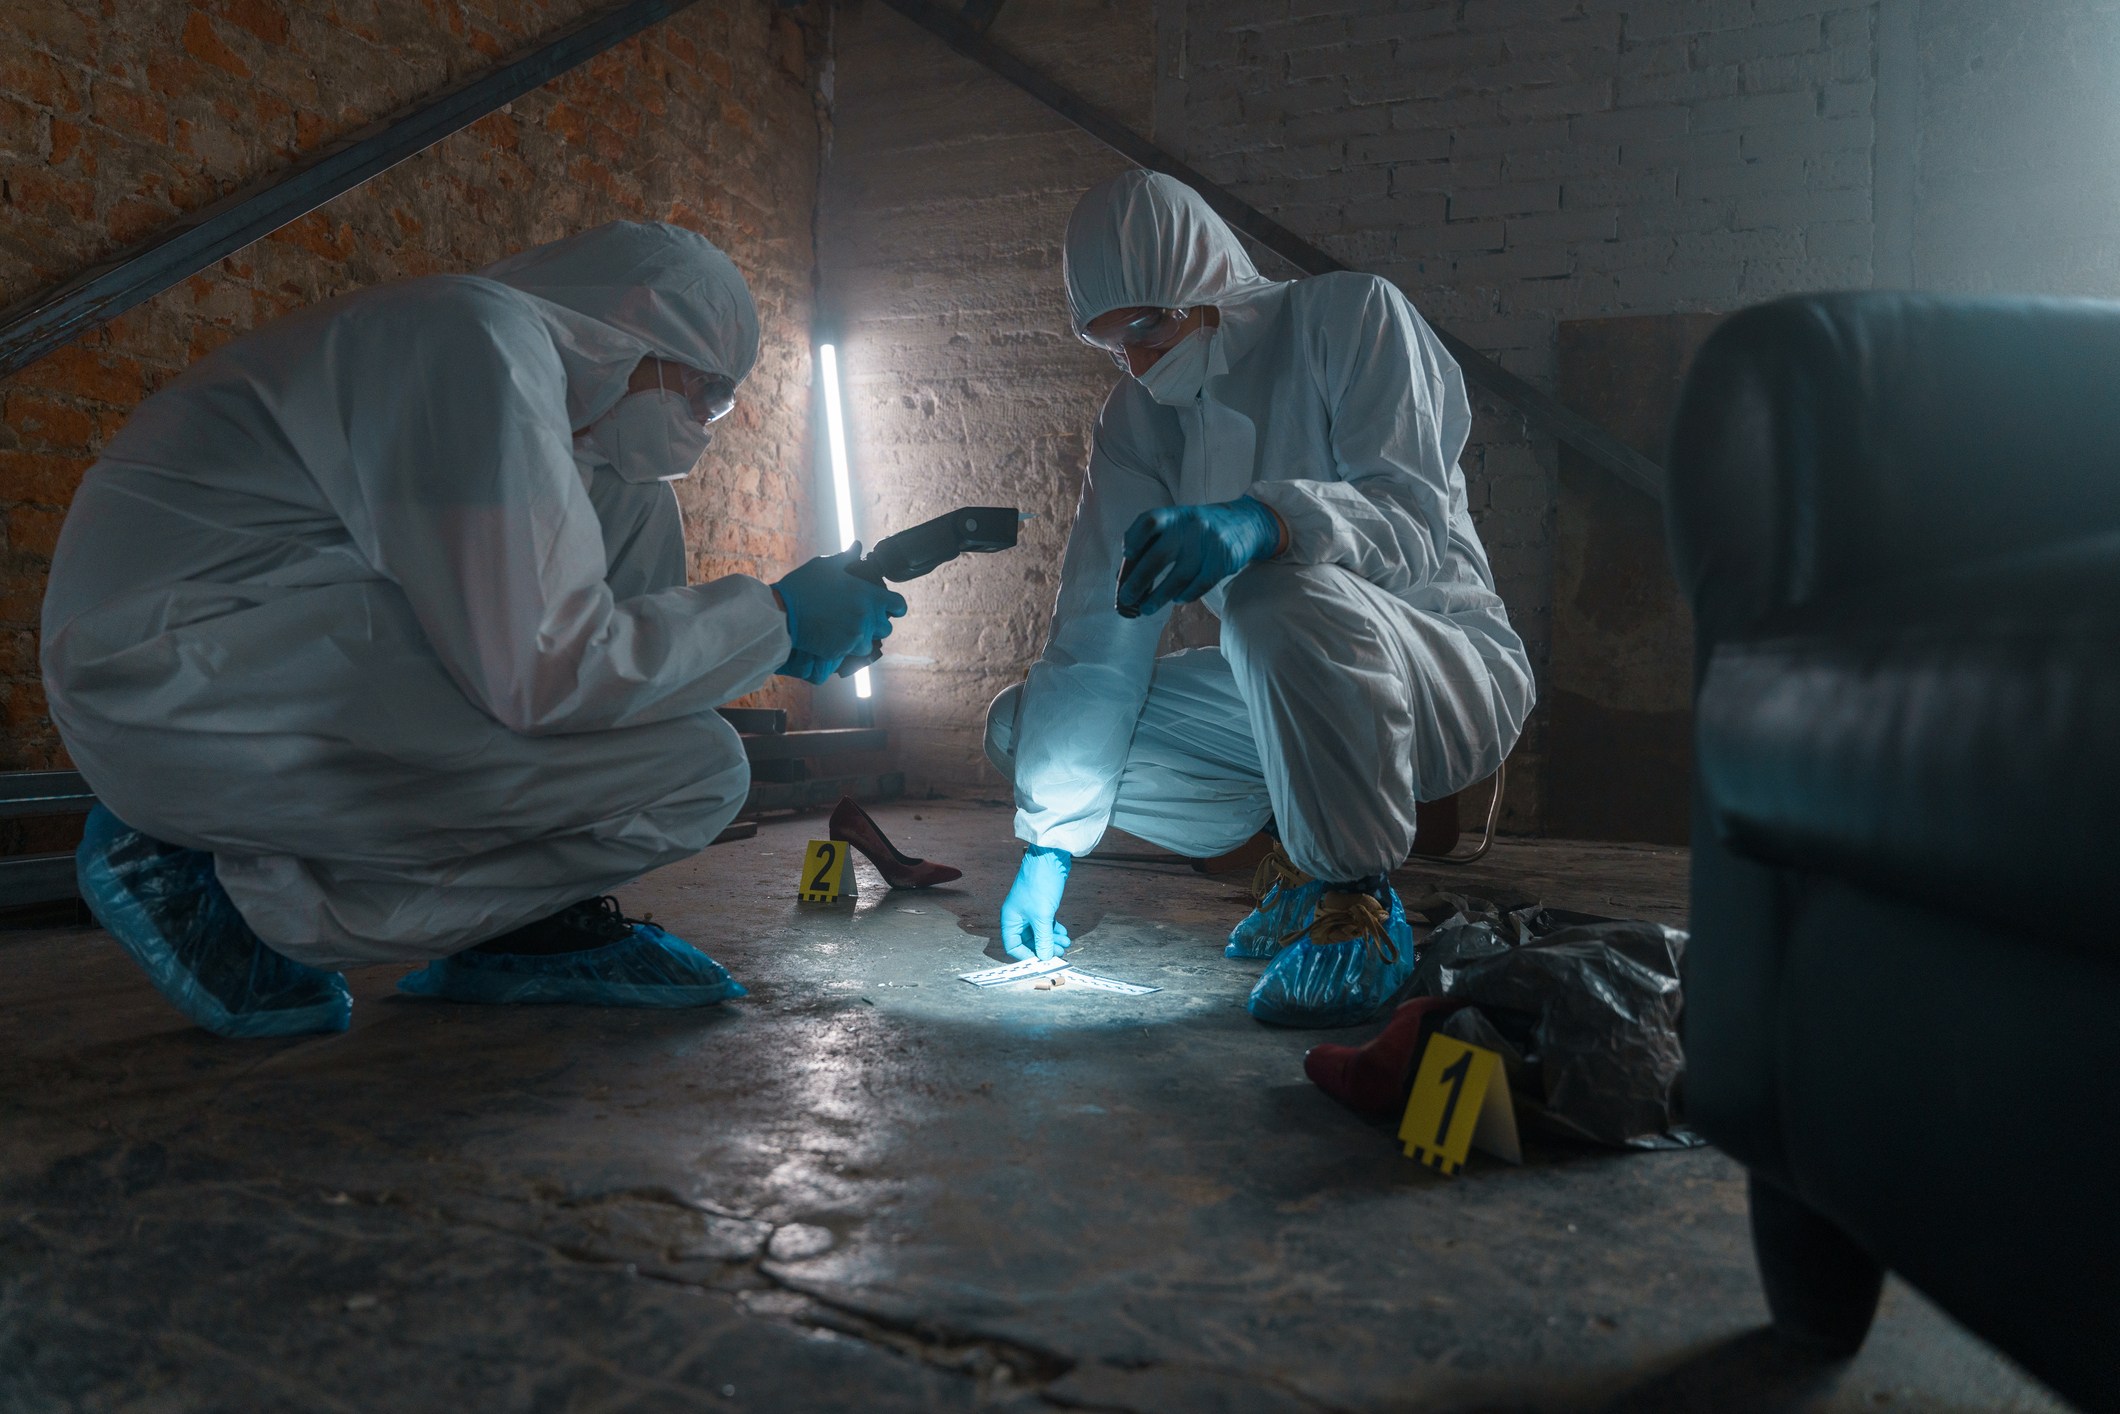 Criminologists in protective suits with camera taking photos of physical evidence in a flashlight light at the crime scene in a warehouse with brick walls